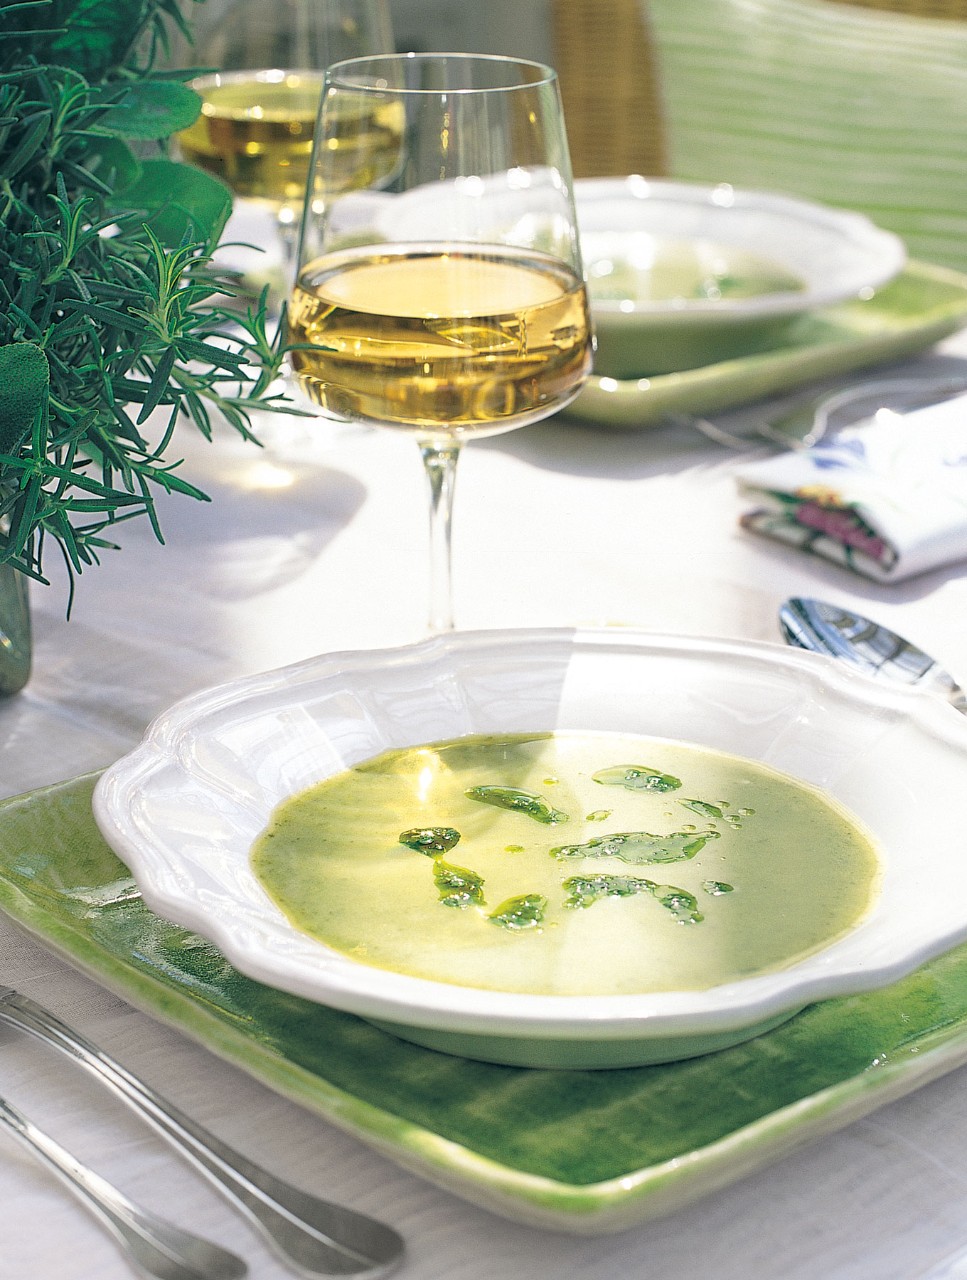 Sorrell and Chive Soup with Chive Oil